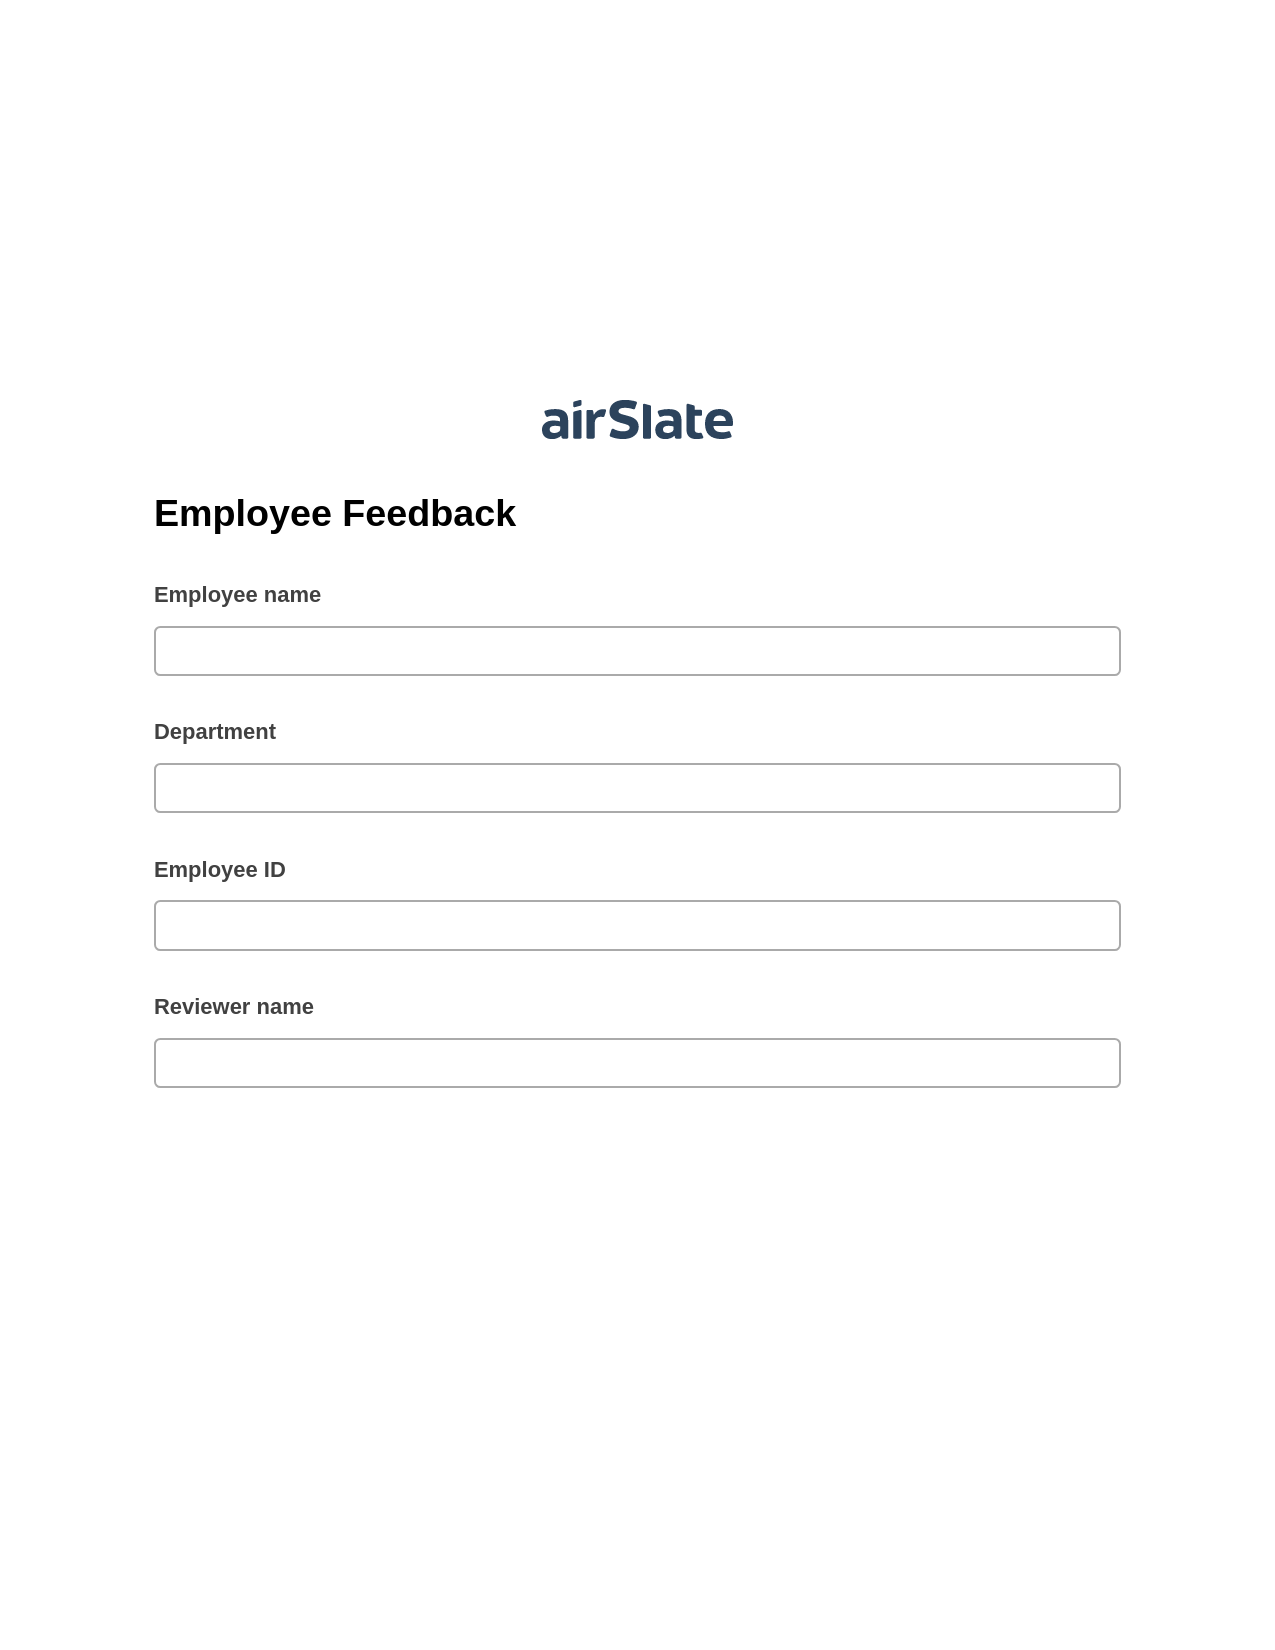 Employee Feedback Pre-fill from CSV File Dropdown Options Bot, Roles Reminder Bot, OneDrive Bot